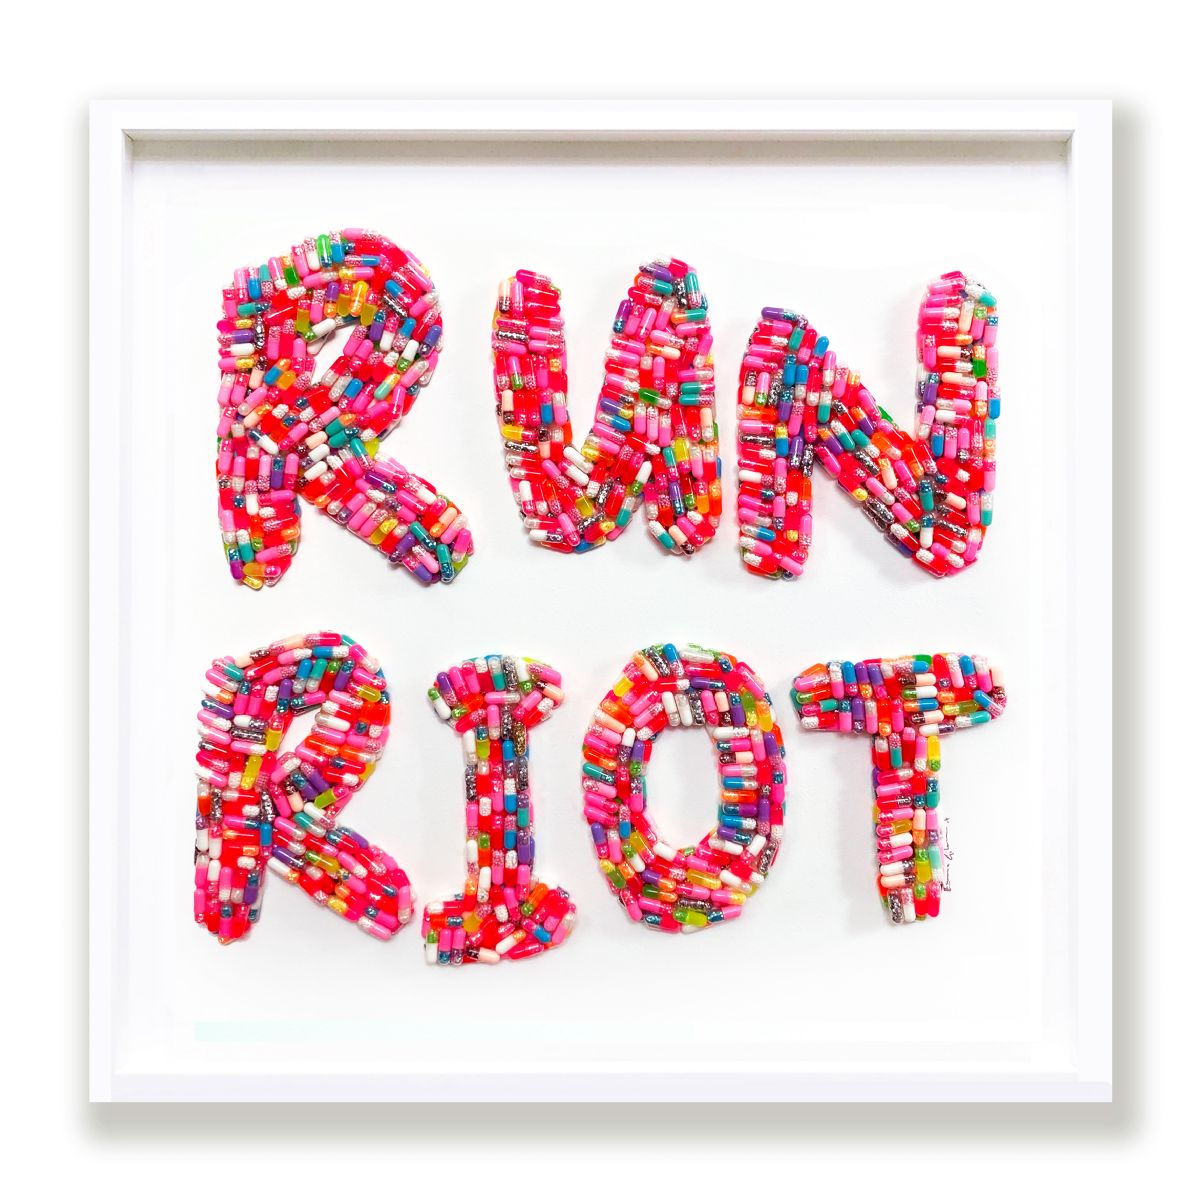 Run Riot by Emma Gibbons